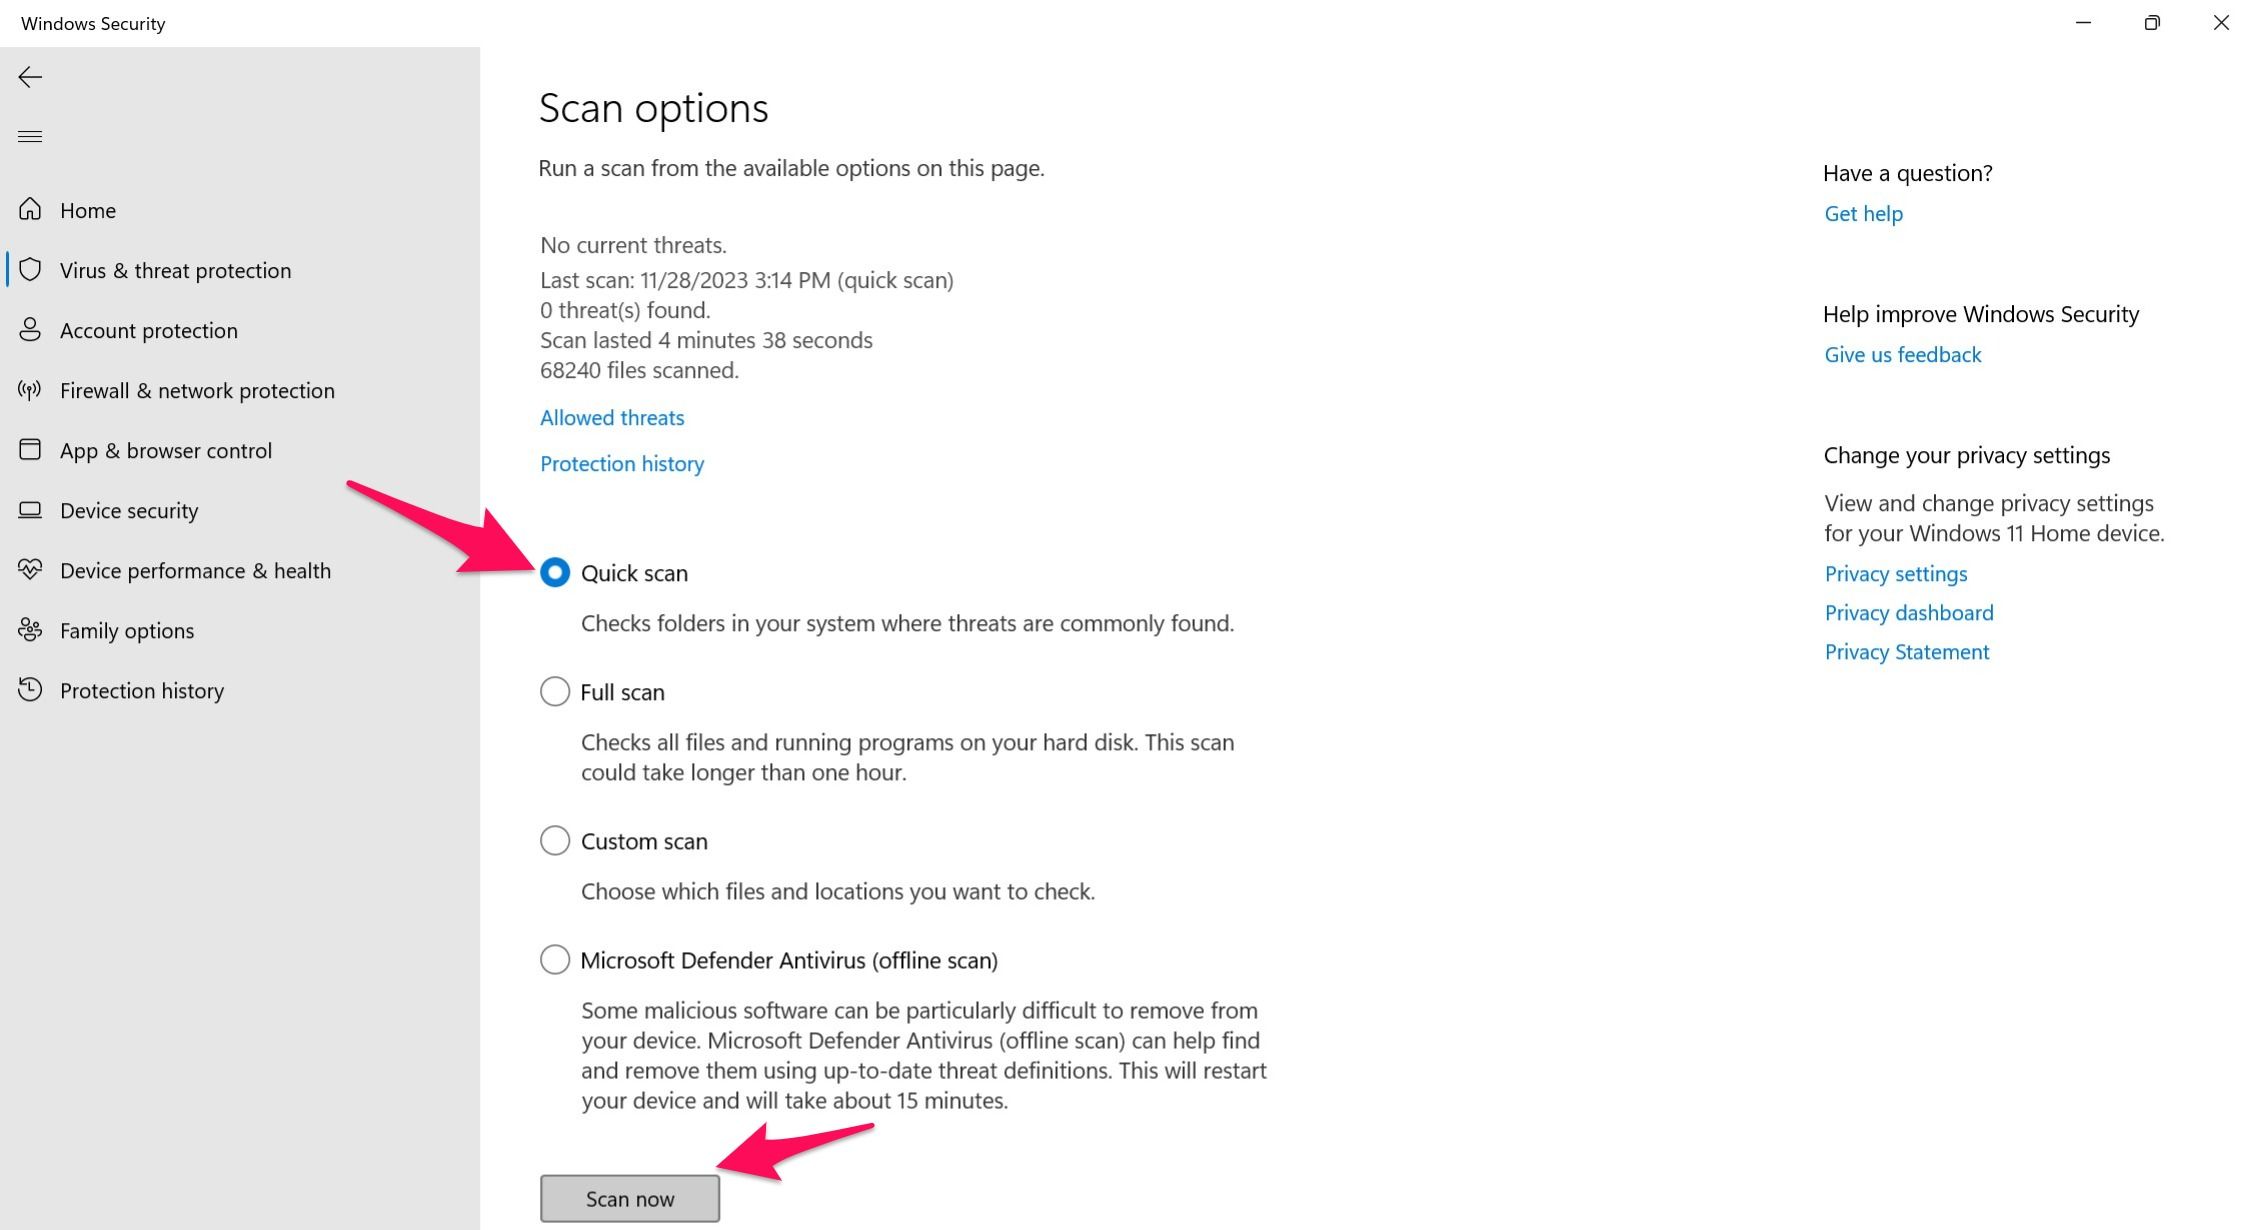 Running a quick scan in the windows security app